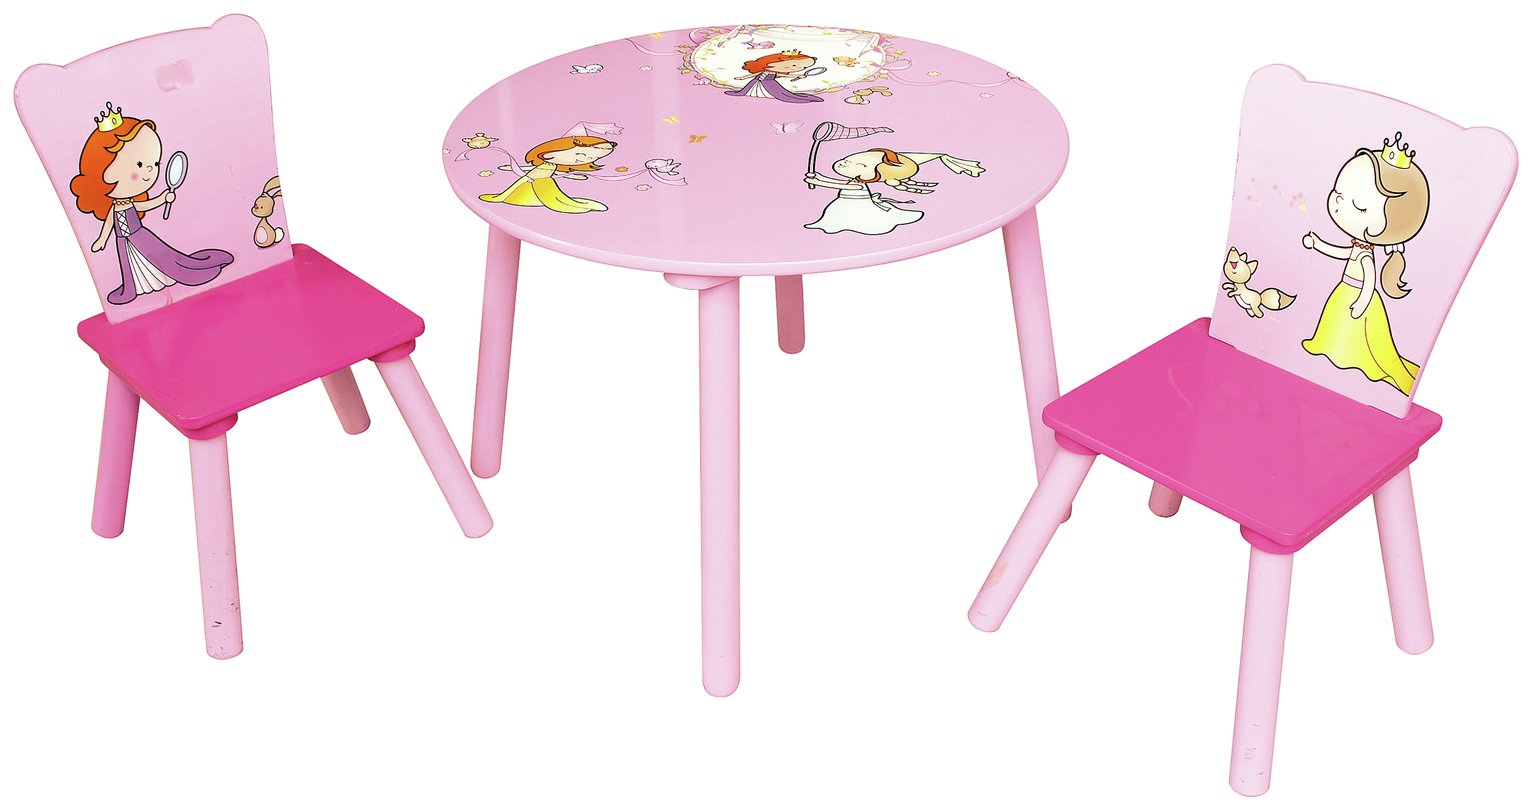 Liberty House Princess Round Table & Chairs Set